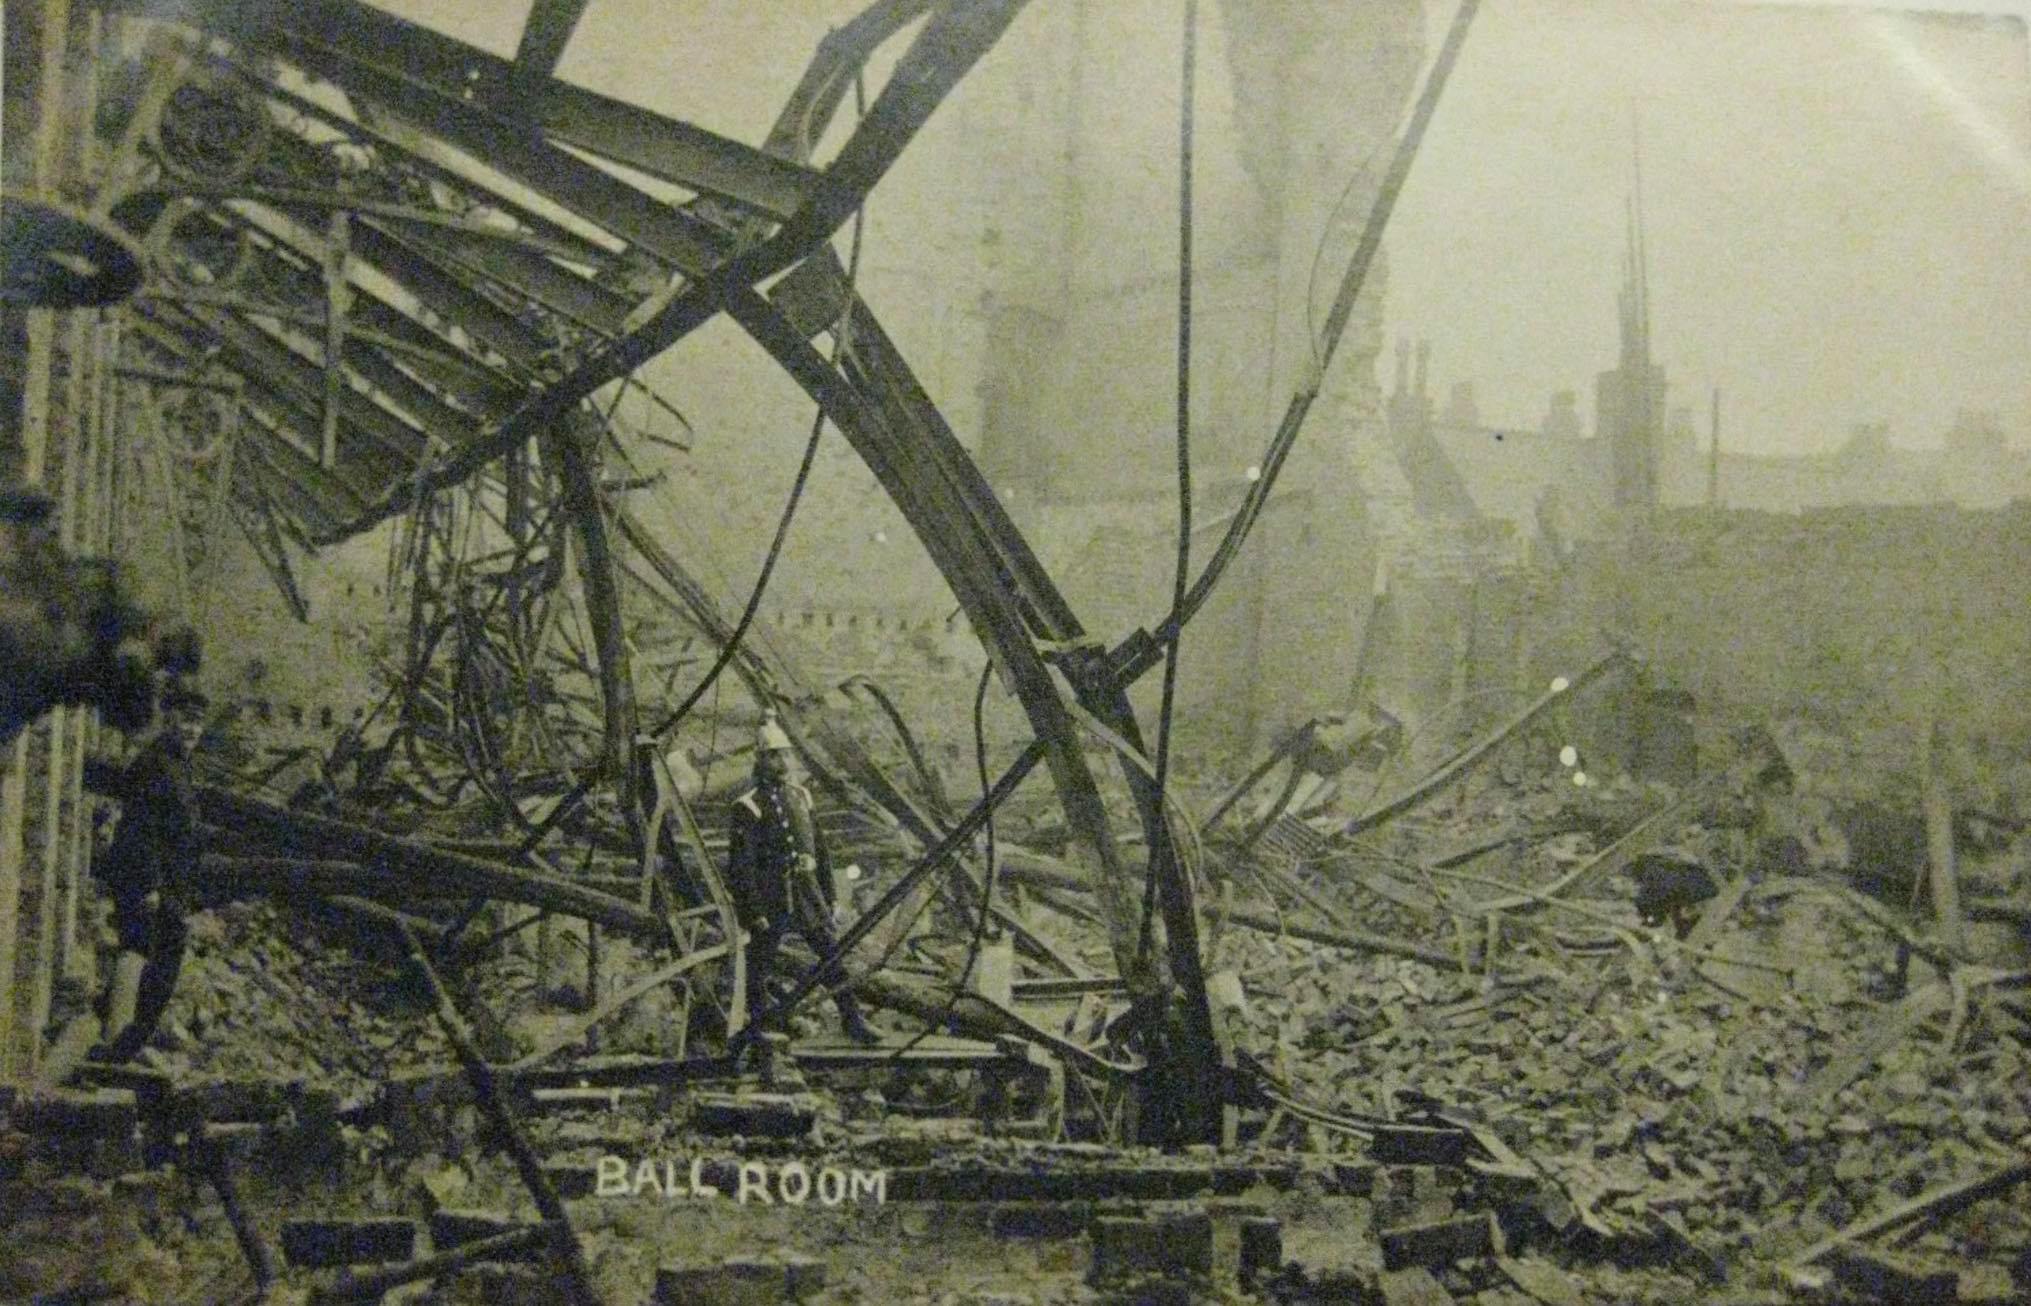 Devastating damage caused by the fire in 1907, which destroyed the Queens Palace glass dome. Pictures from Stuart Jones